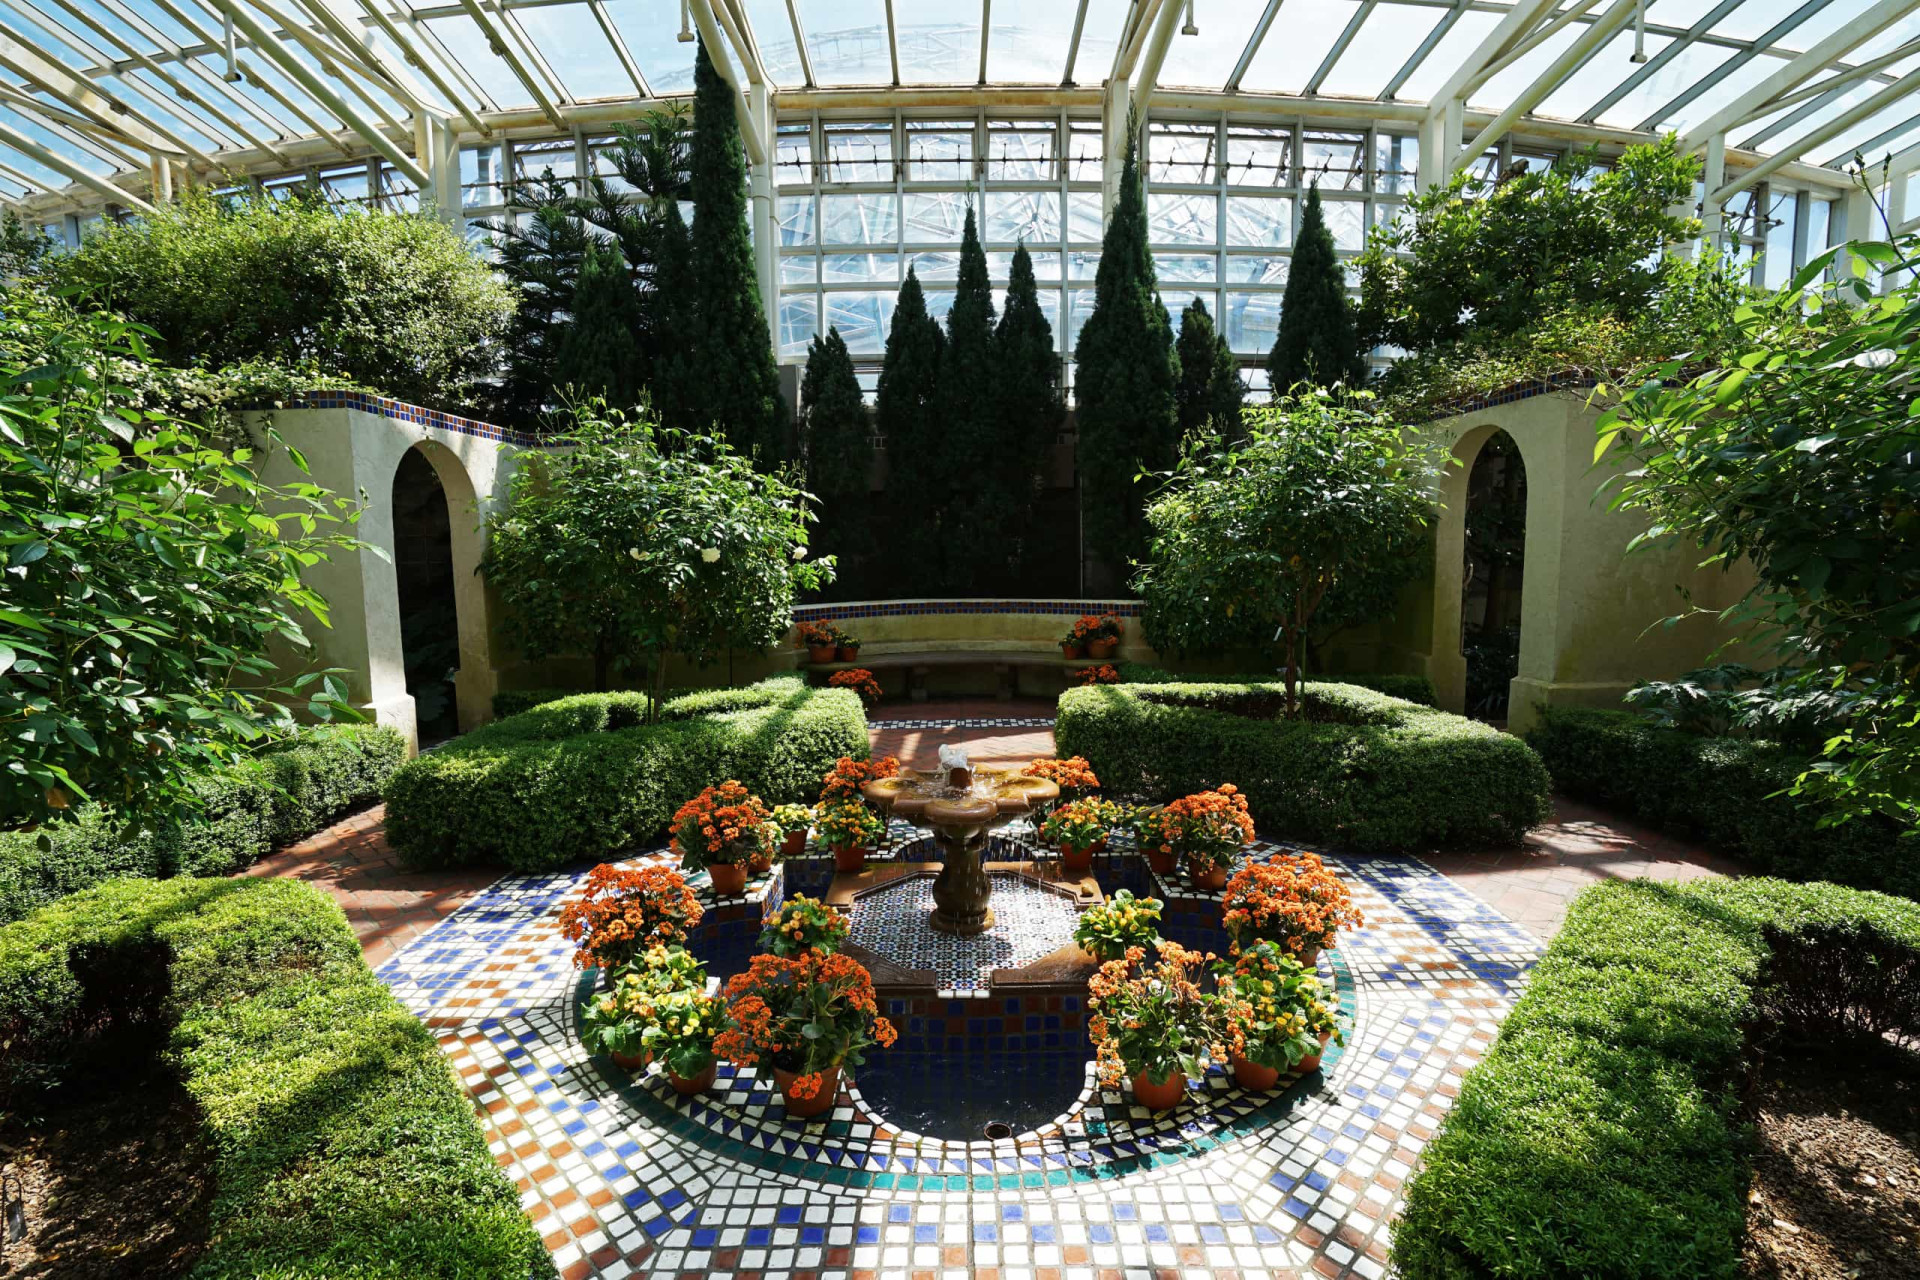 <p>In the heart of St. Louis, the glorious Missouri Botanical Garden is an oasis of greenery and spectacular flower displays. Highlights of the themed gardens include the English Woodland Garden and the Chinese Garden.</p><p><a href="https://www.msn.com/en-us/community/channel/vid-7xx8mnucu55yw63we9va2gwr7uihbxwc68fxqp25x6tg4ftibpra?cvid=94631541bc0f4f89bfd59158d696ad7e">Follow us and access great exclusive content every day</a></p>